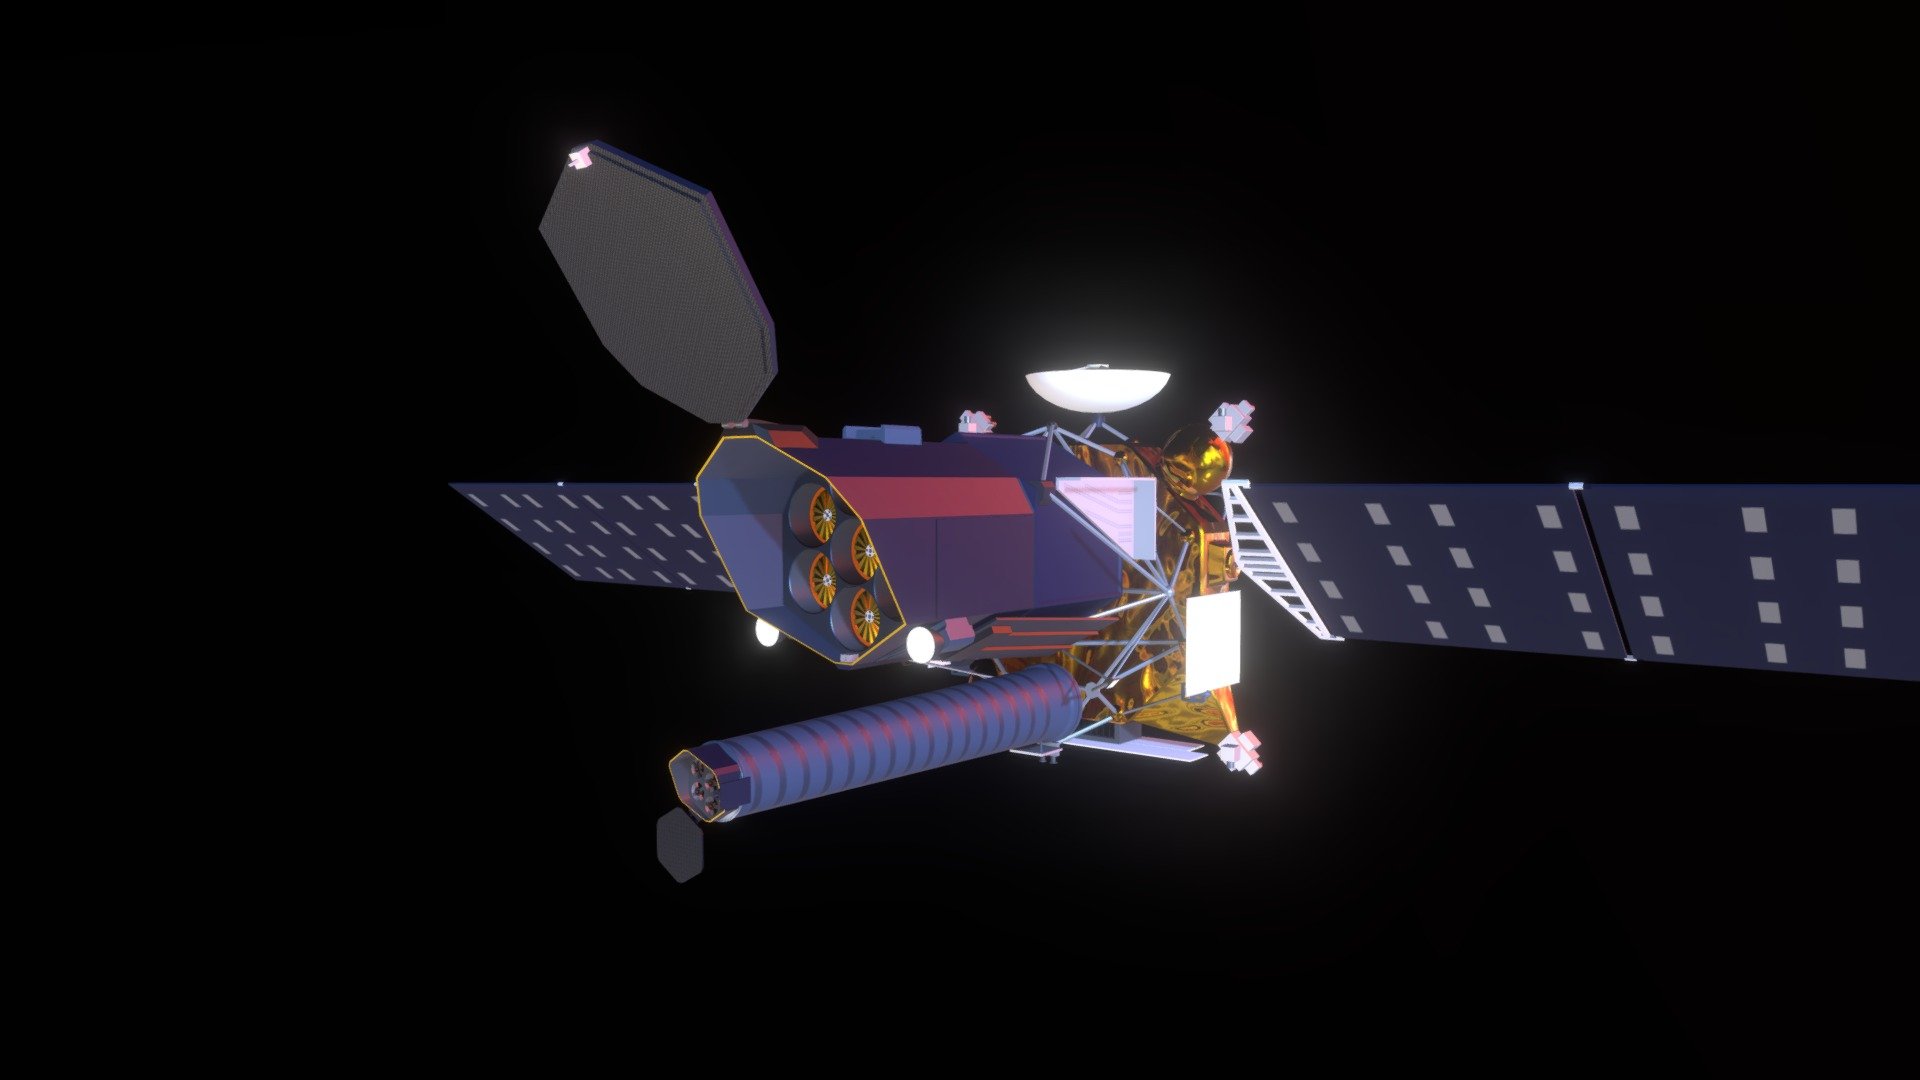 Spektr-RG (Russian: Спектр-РГ, Spectrum + Röntgen + Gamma; also called Spectrum-X-Gamma, SRG, SXG) is a Russian–German high-energy astrophysics space observatory which was launched on 13 July 2019.

The primary instrument of the mission is eROSITA, built by the Max Planck Institute for Extraterrestrial Physics (MPE) in Germany. It will conduct a seven-year X-ray survey,the first in the medium X-ray band less than 10 keV energies, and the first to map all estimated 100,000 galaxy clusters. This survey may detect new clusters of galaxies and active galactic nuclei. The second instrument, ART-XC, is a Russian high-energy X-ray telescope capable of detecting supermassive black holes. 

The spacecraft will enter an orbit around the Sun, circling the Sun-Earth L2 Lagrangian point in a halo orbit, about 1.5 million kilometres away from Earth. Three years of observations of selected galaxy clusters and AGNs (Active Galactic Nuclei) are planned 3d model